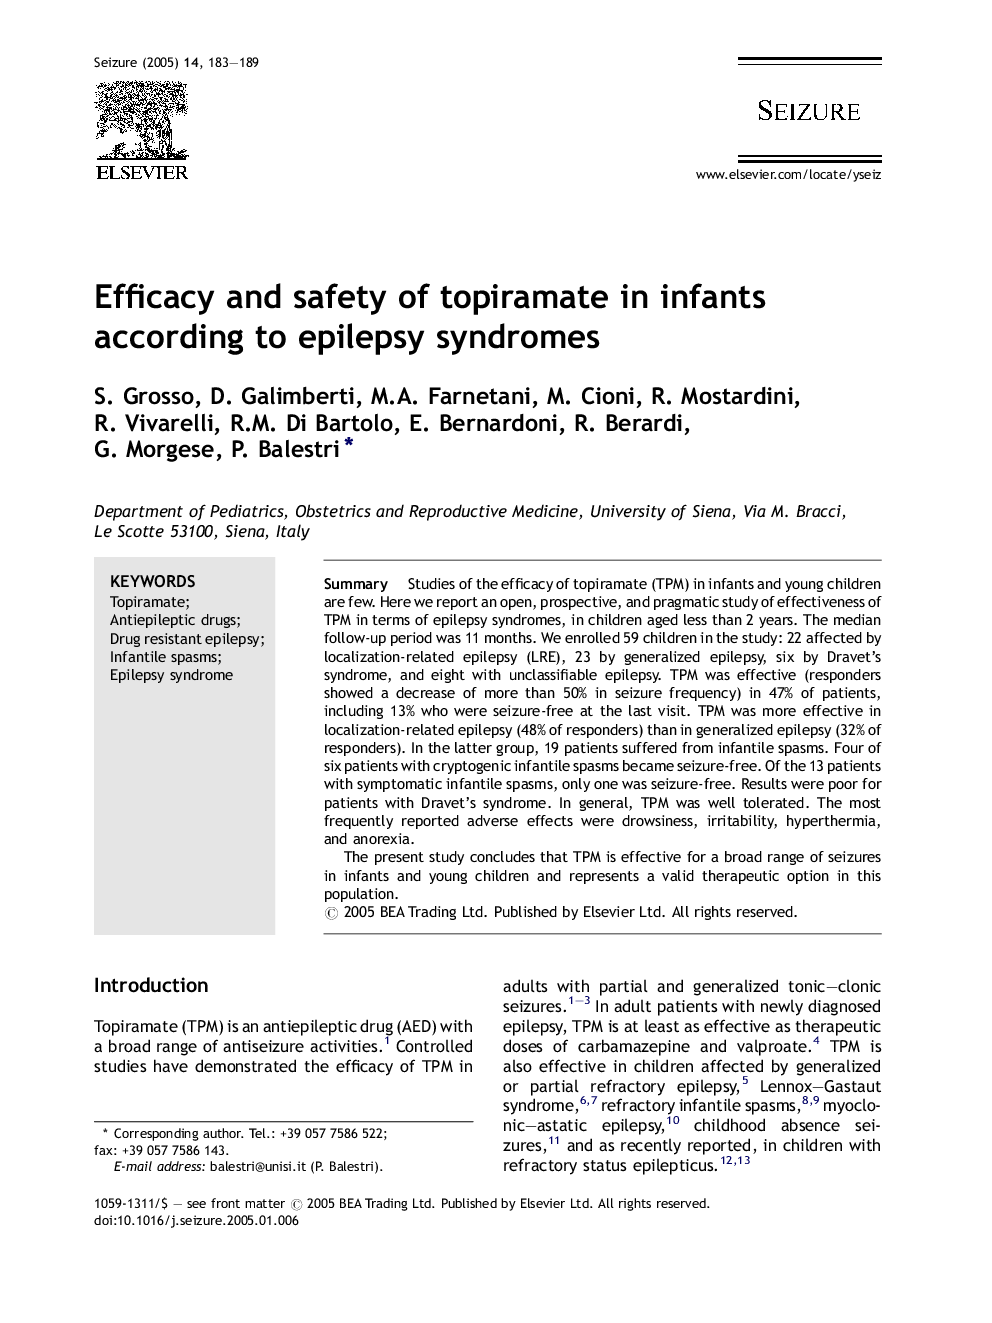 Efficacy and safety of topiramate in infants according to epilepsy syndromes